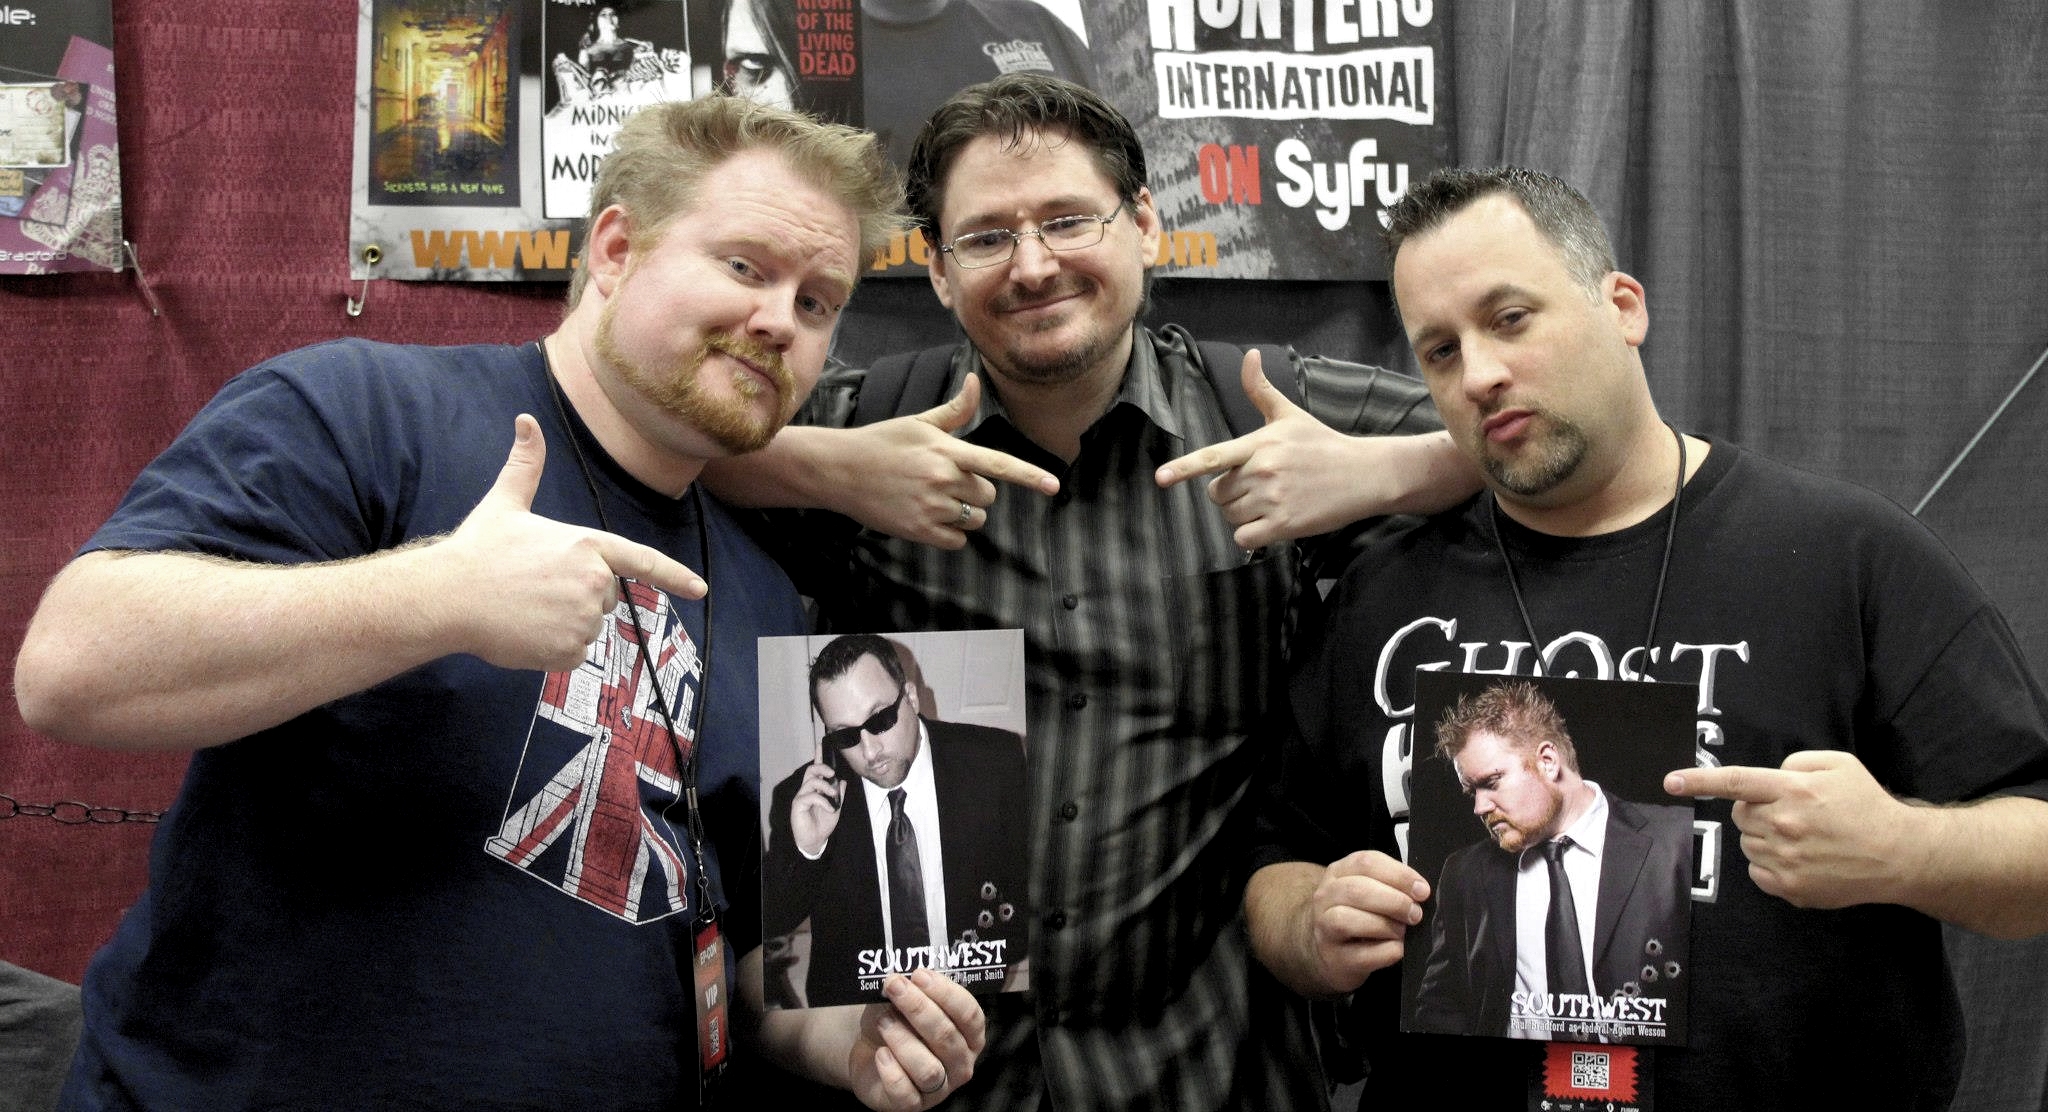 Shawn Lecrone, Scott Tepperman, and Paul Bradford from Southwest at El Paso Comic Con, 2012